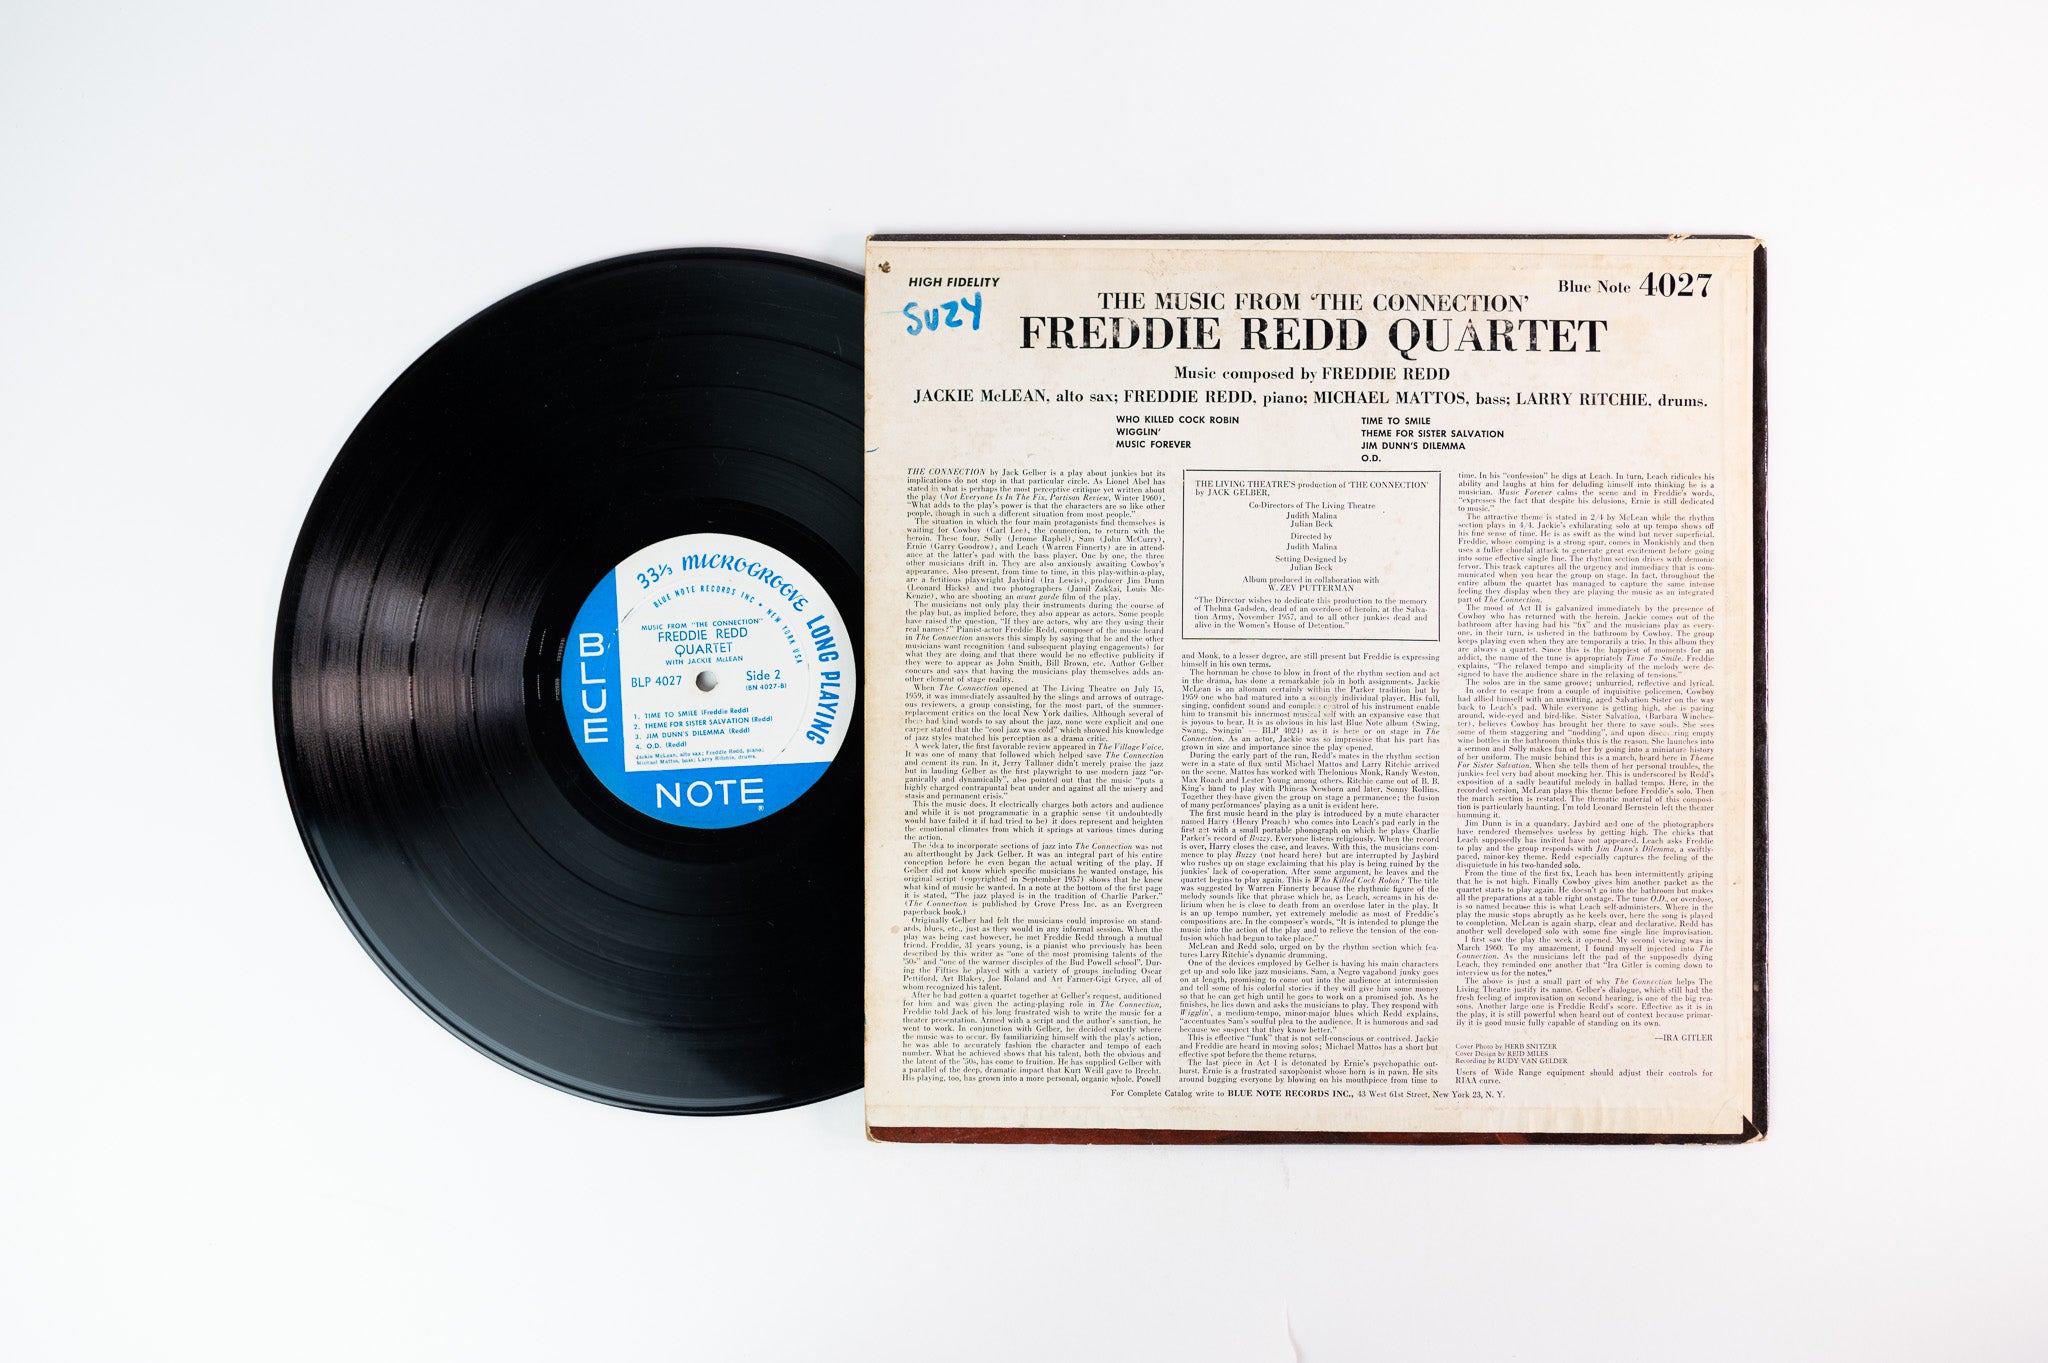 Freddie Redd Quartet - The Music From "The Connection" on Blue Note NY Mono Deep Groove